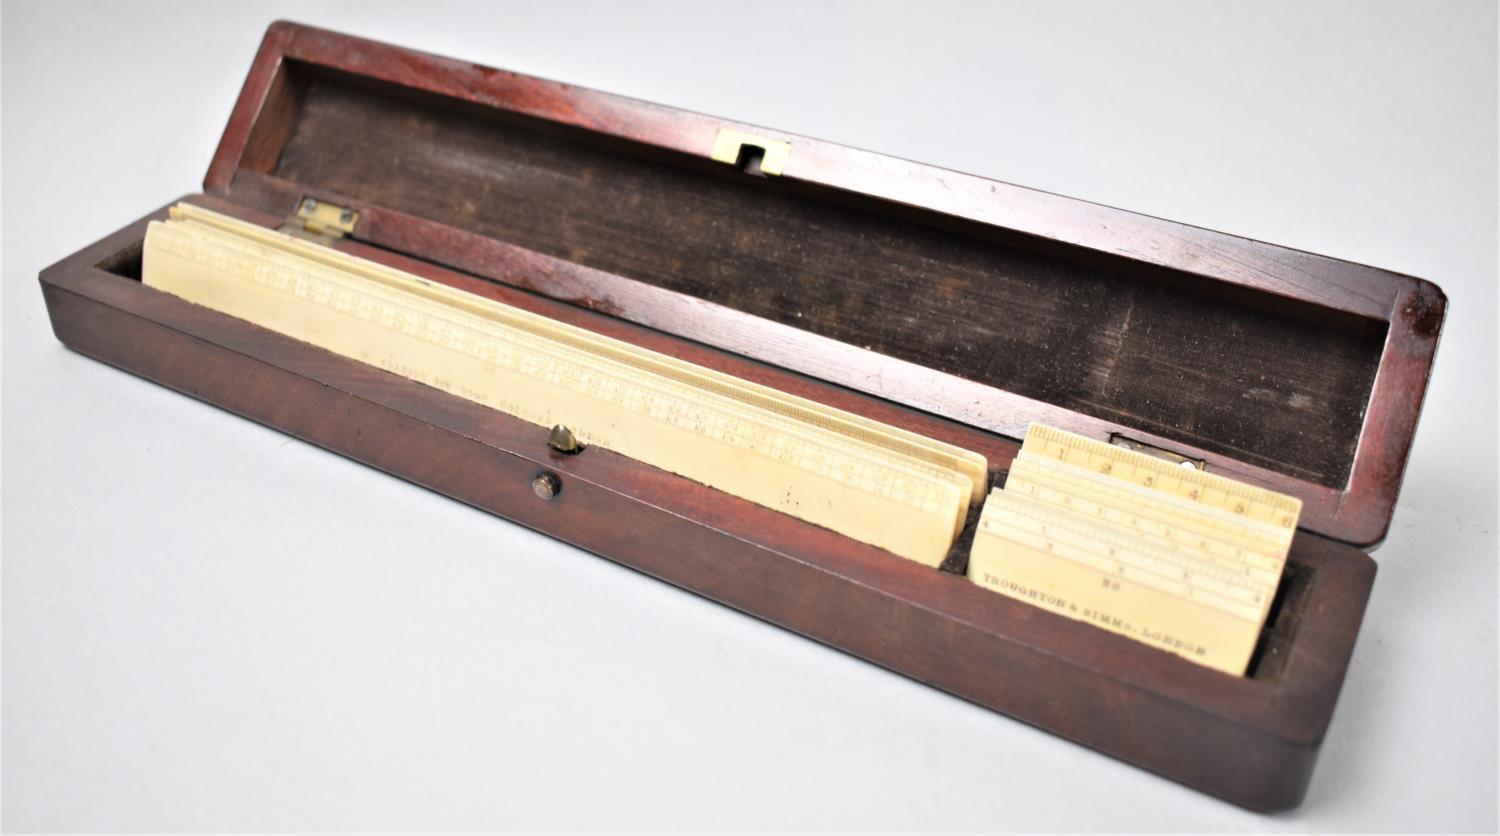 A Late 19th/Early 20th Century Mahogany Craftsmans Box Containing Ivory Scale Rules by Elliot,